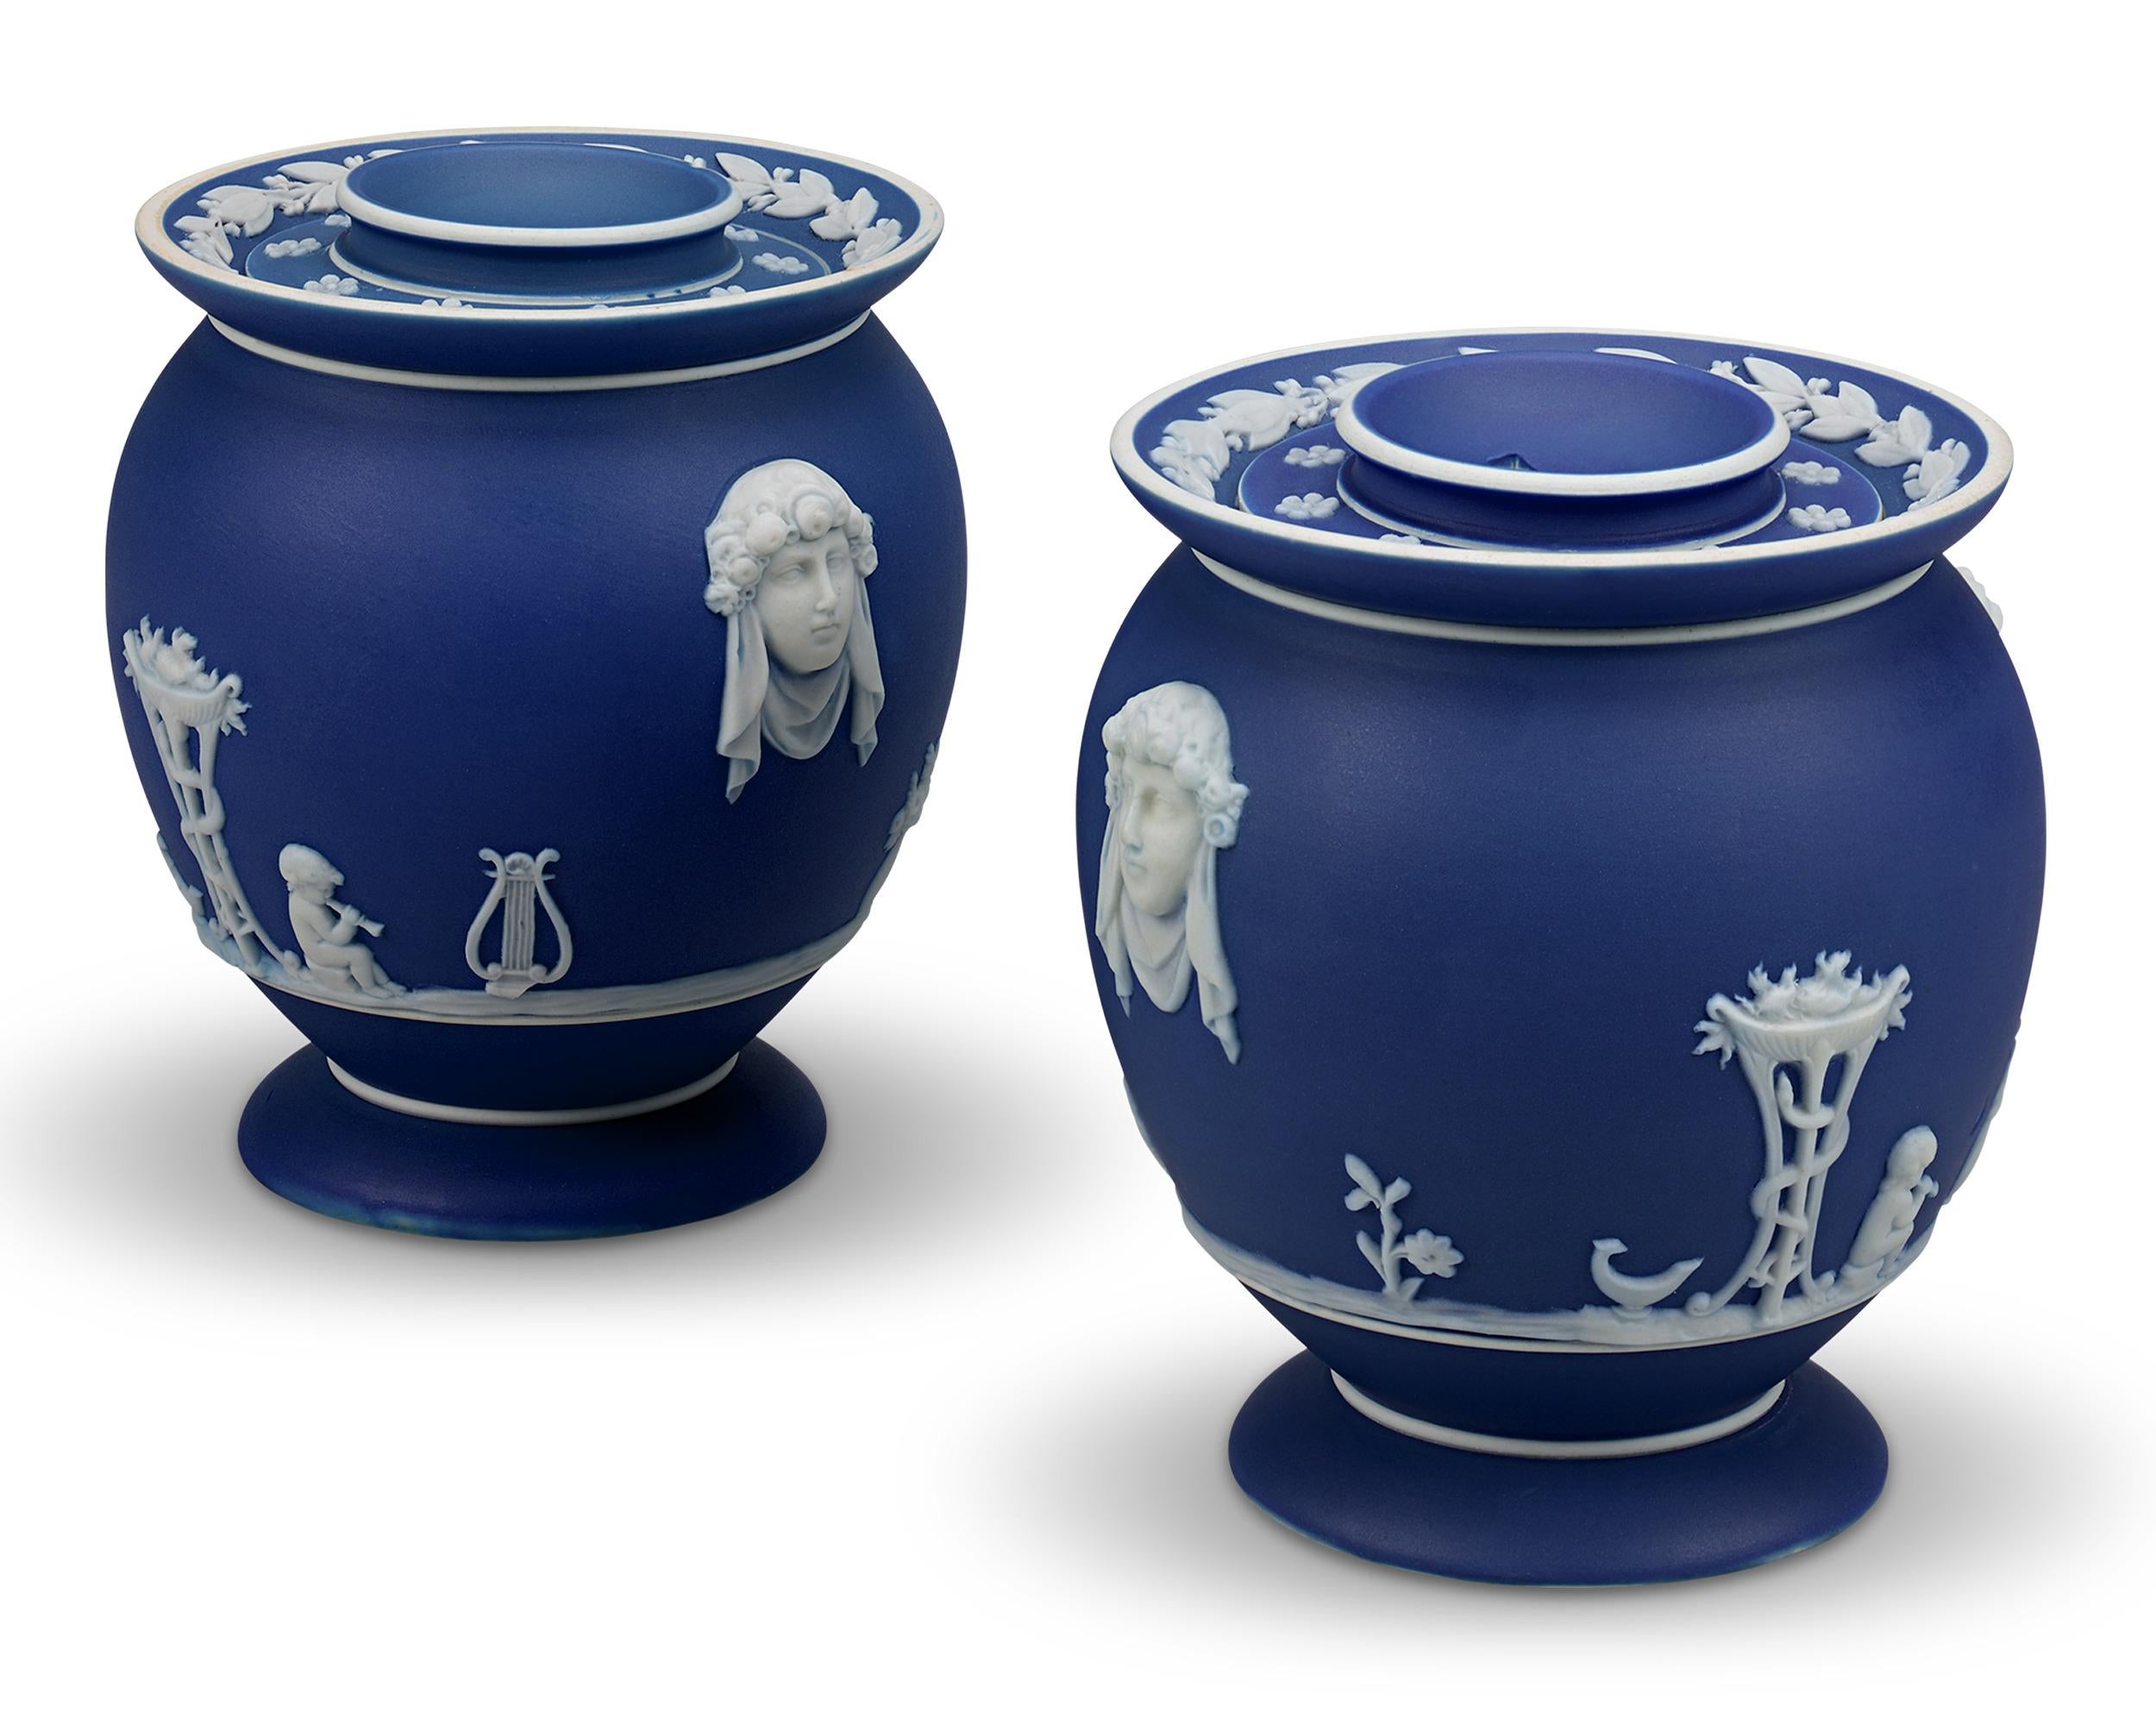 Timeless and elegant, this pair of Wedgwood fumigator jars is crafted of the firm’s signature jasperware. This pair of vessels showcases a striking deep blue hue, contrasting greatly with the classical figures rendered in relief on their surface.